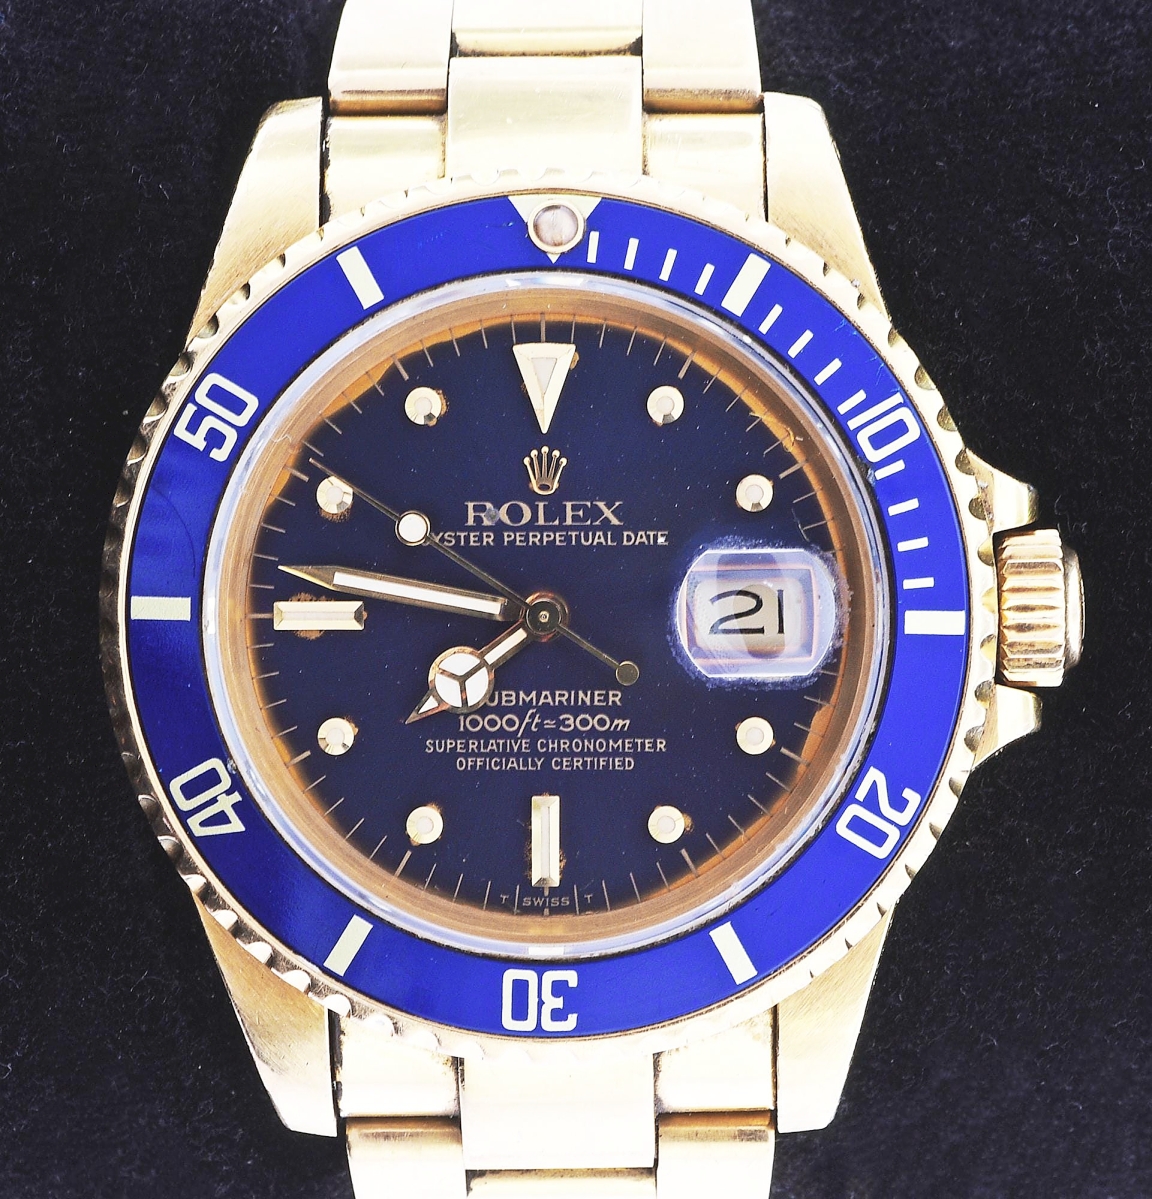 Early Furniture, Rolex Watches & Vintage Cars Draw Bidders To Bill ...